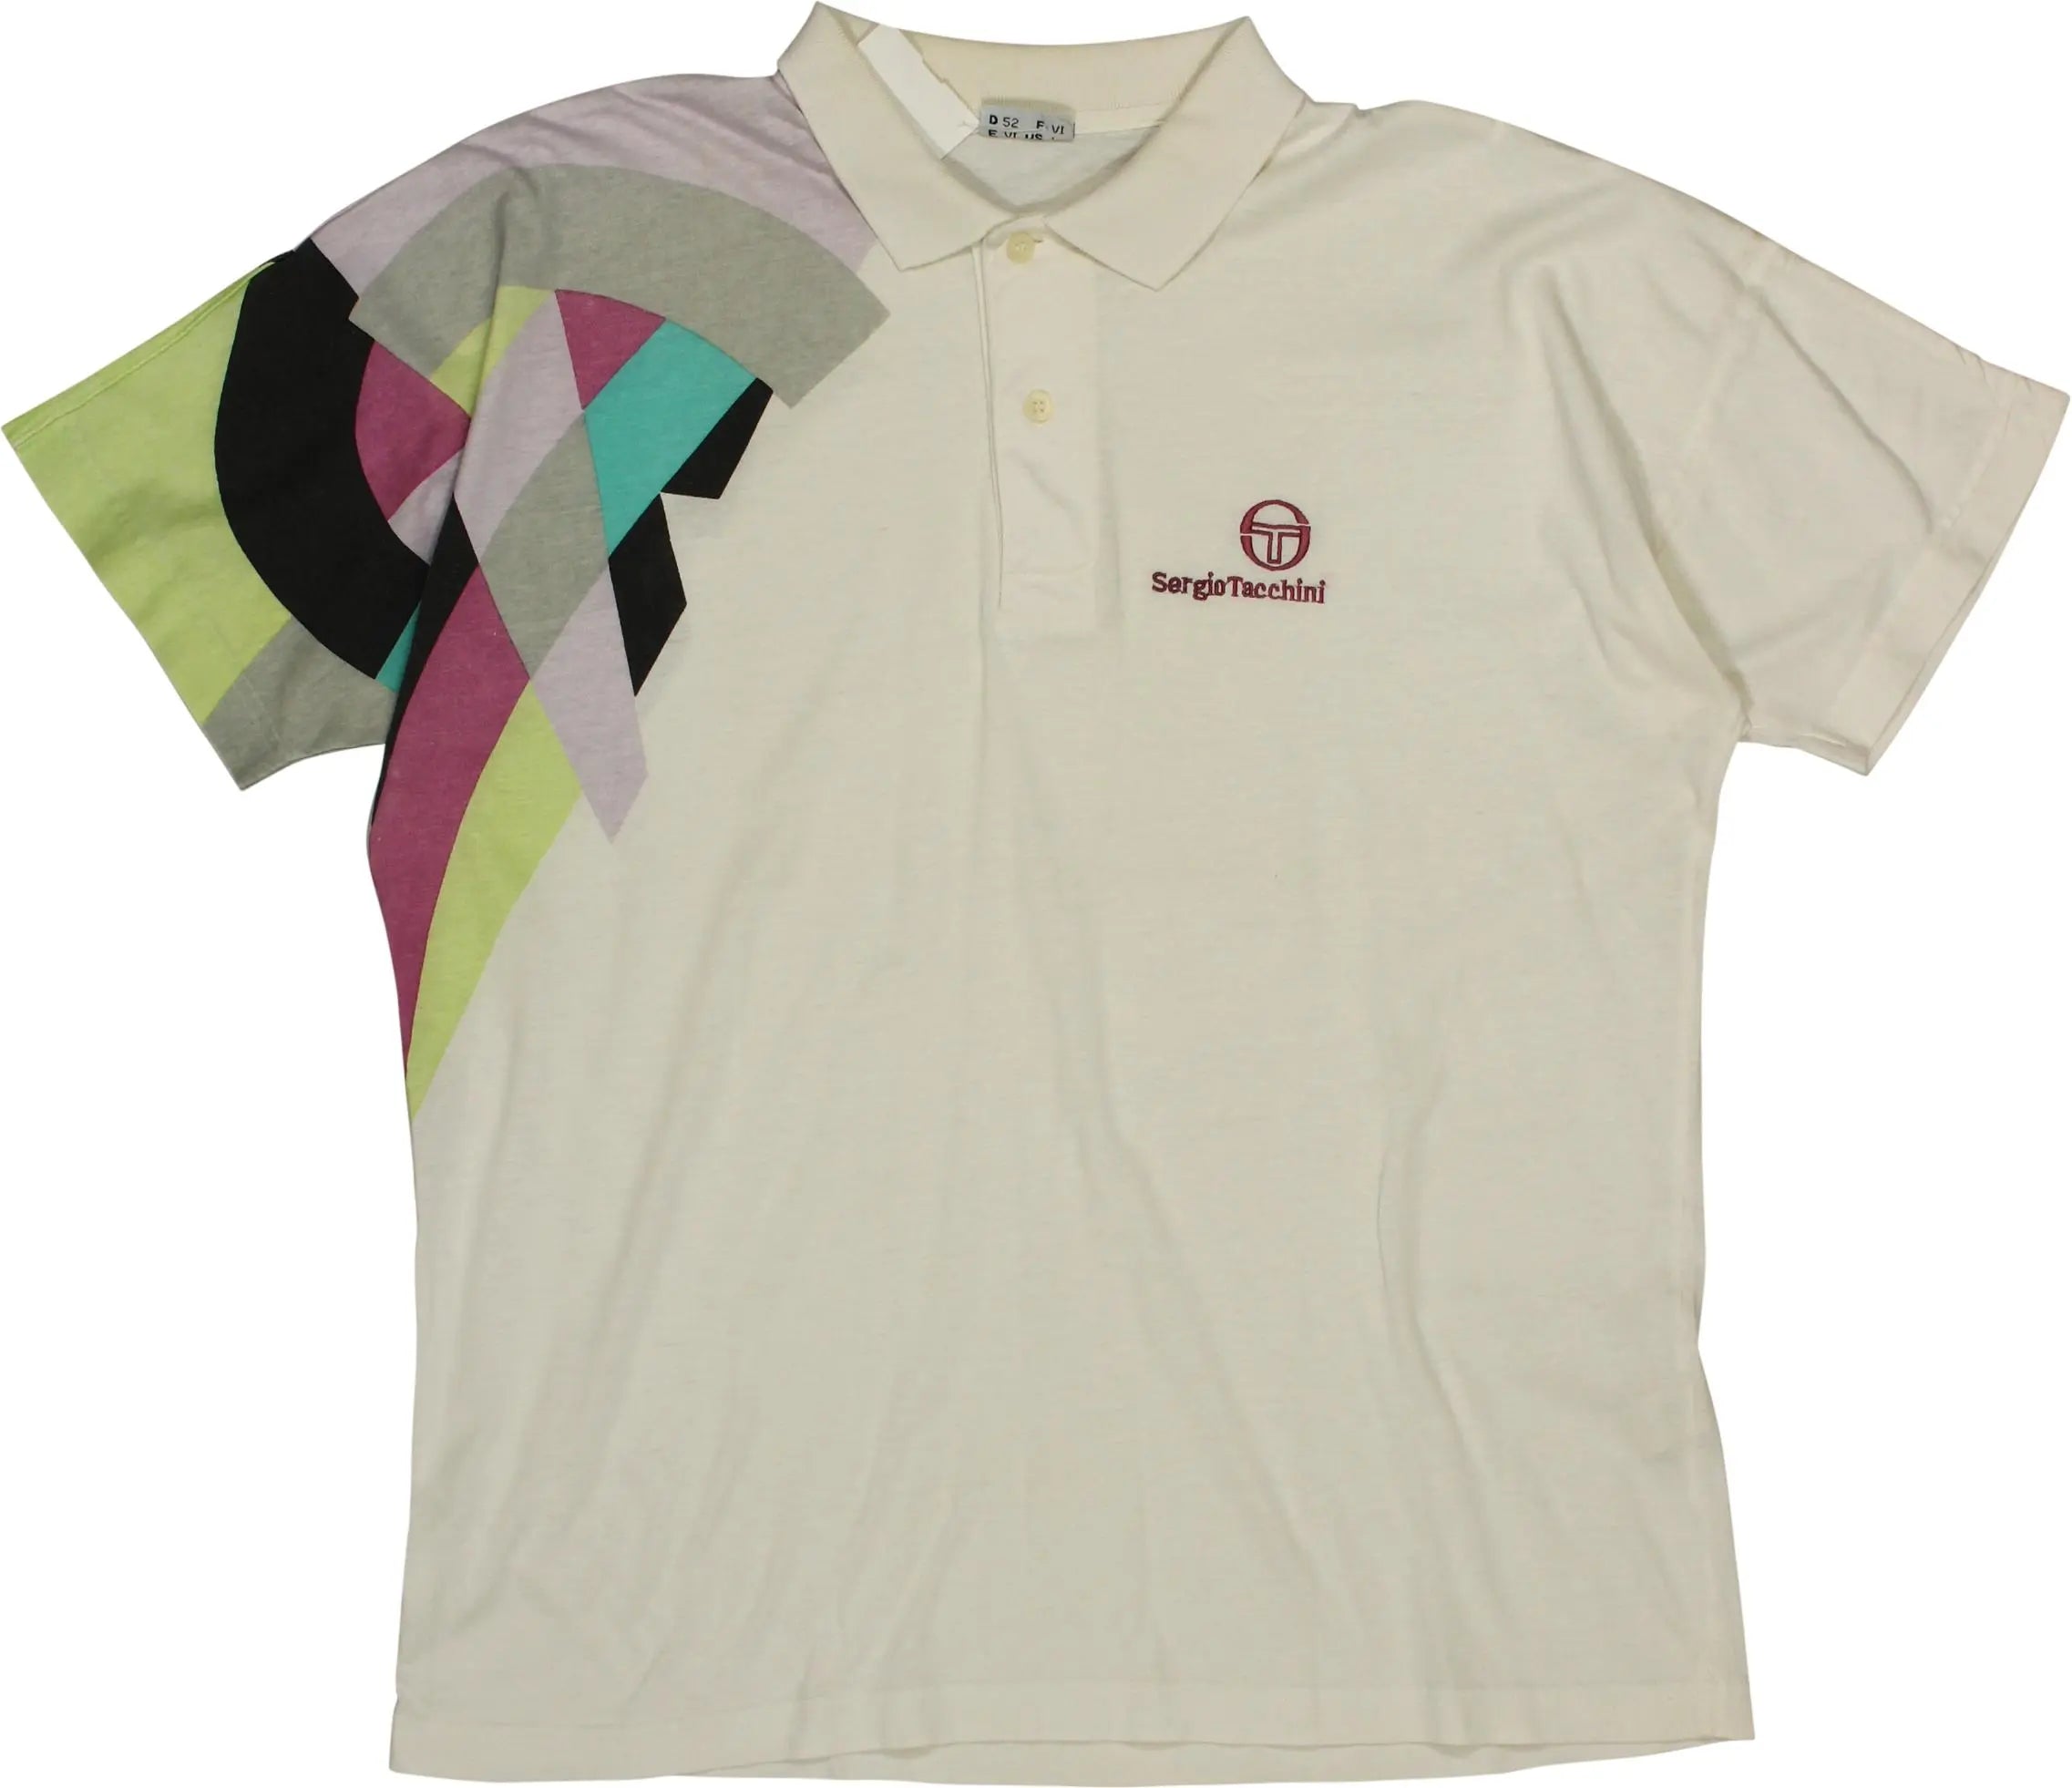 Sergio Tacchini - Polo- ThriftTale.com - Vintage and second handclothing